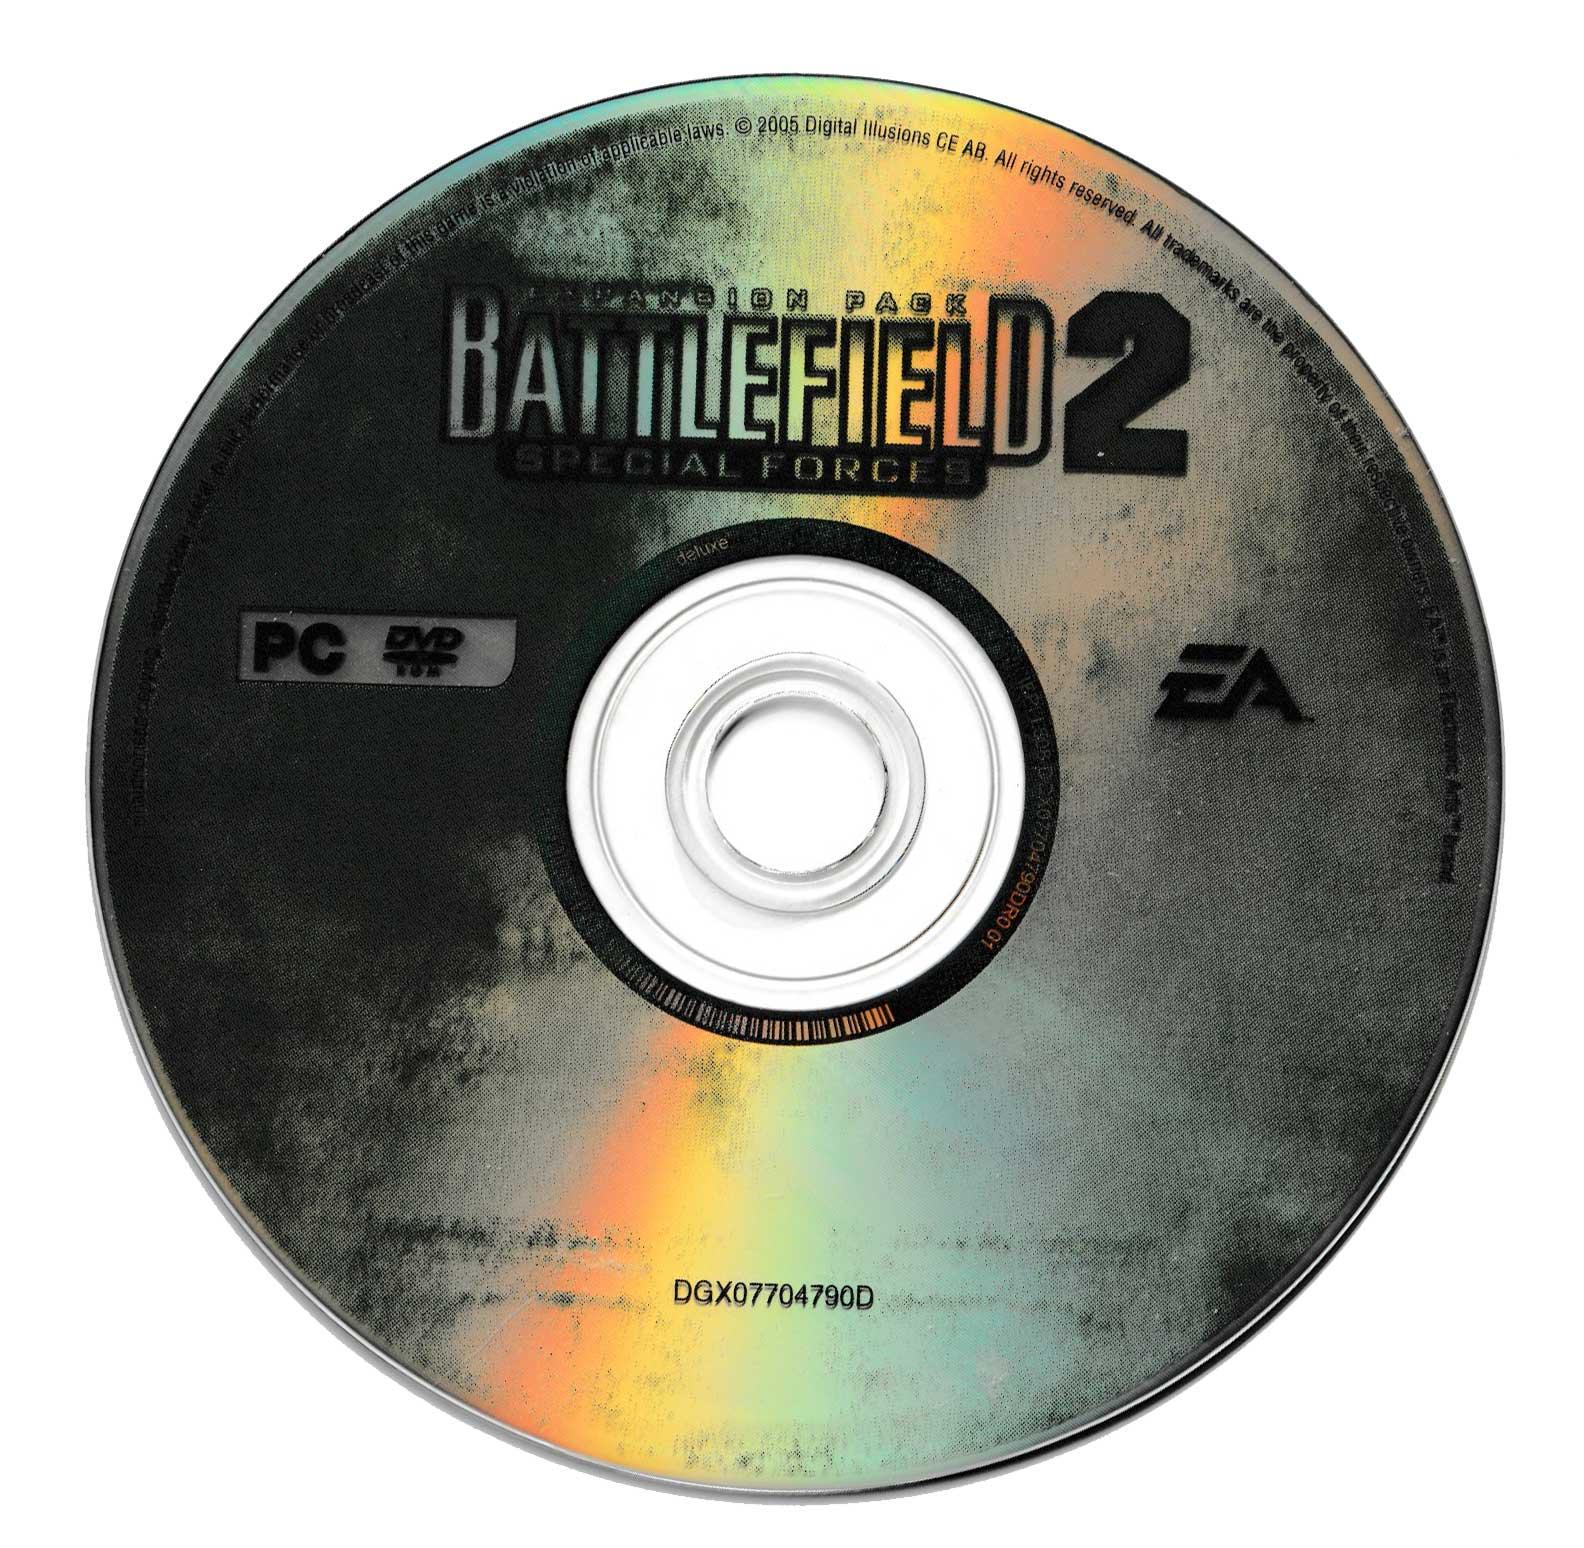 Battlefield 2 Special Forces Expansion Pack - Classic Windows PC Game